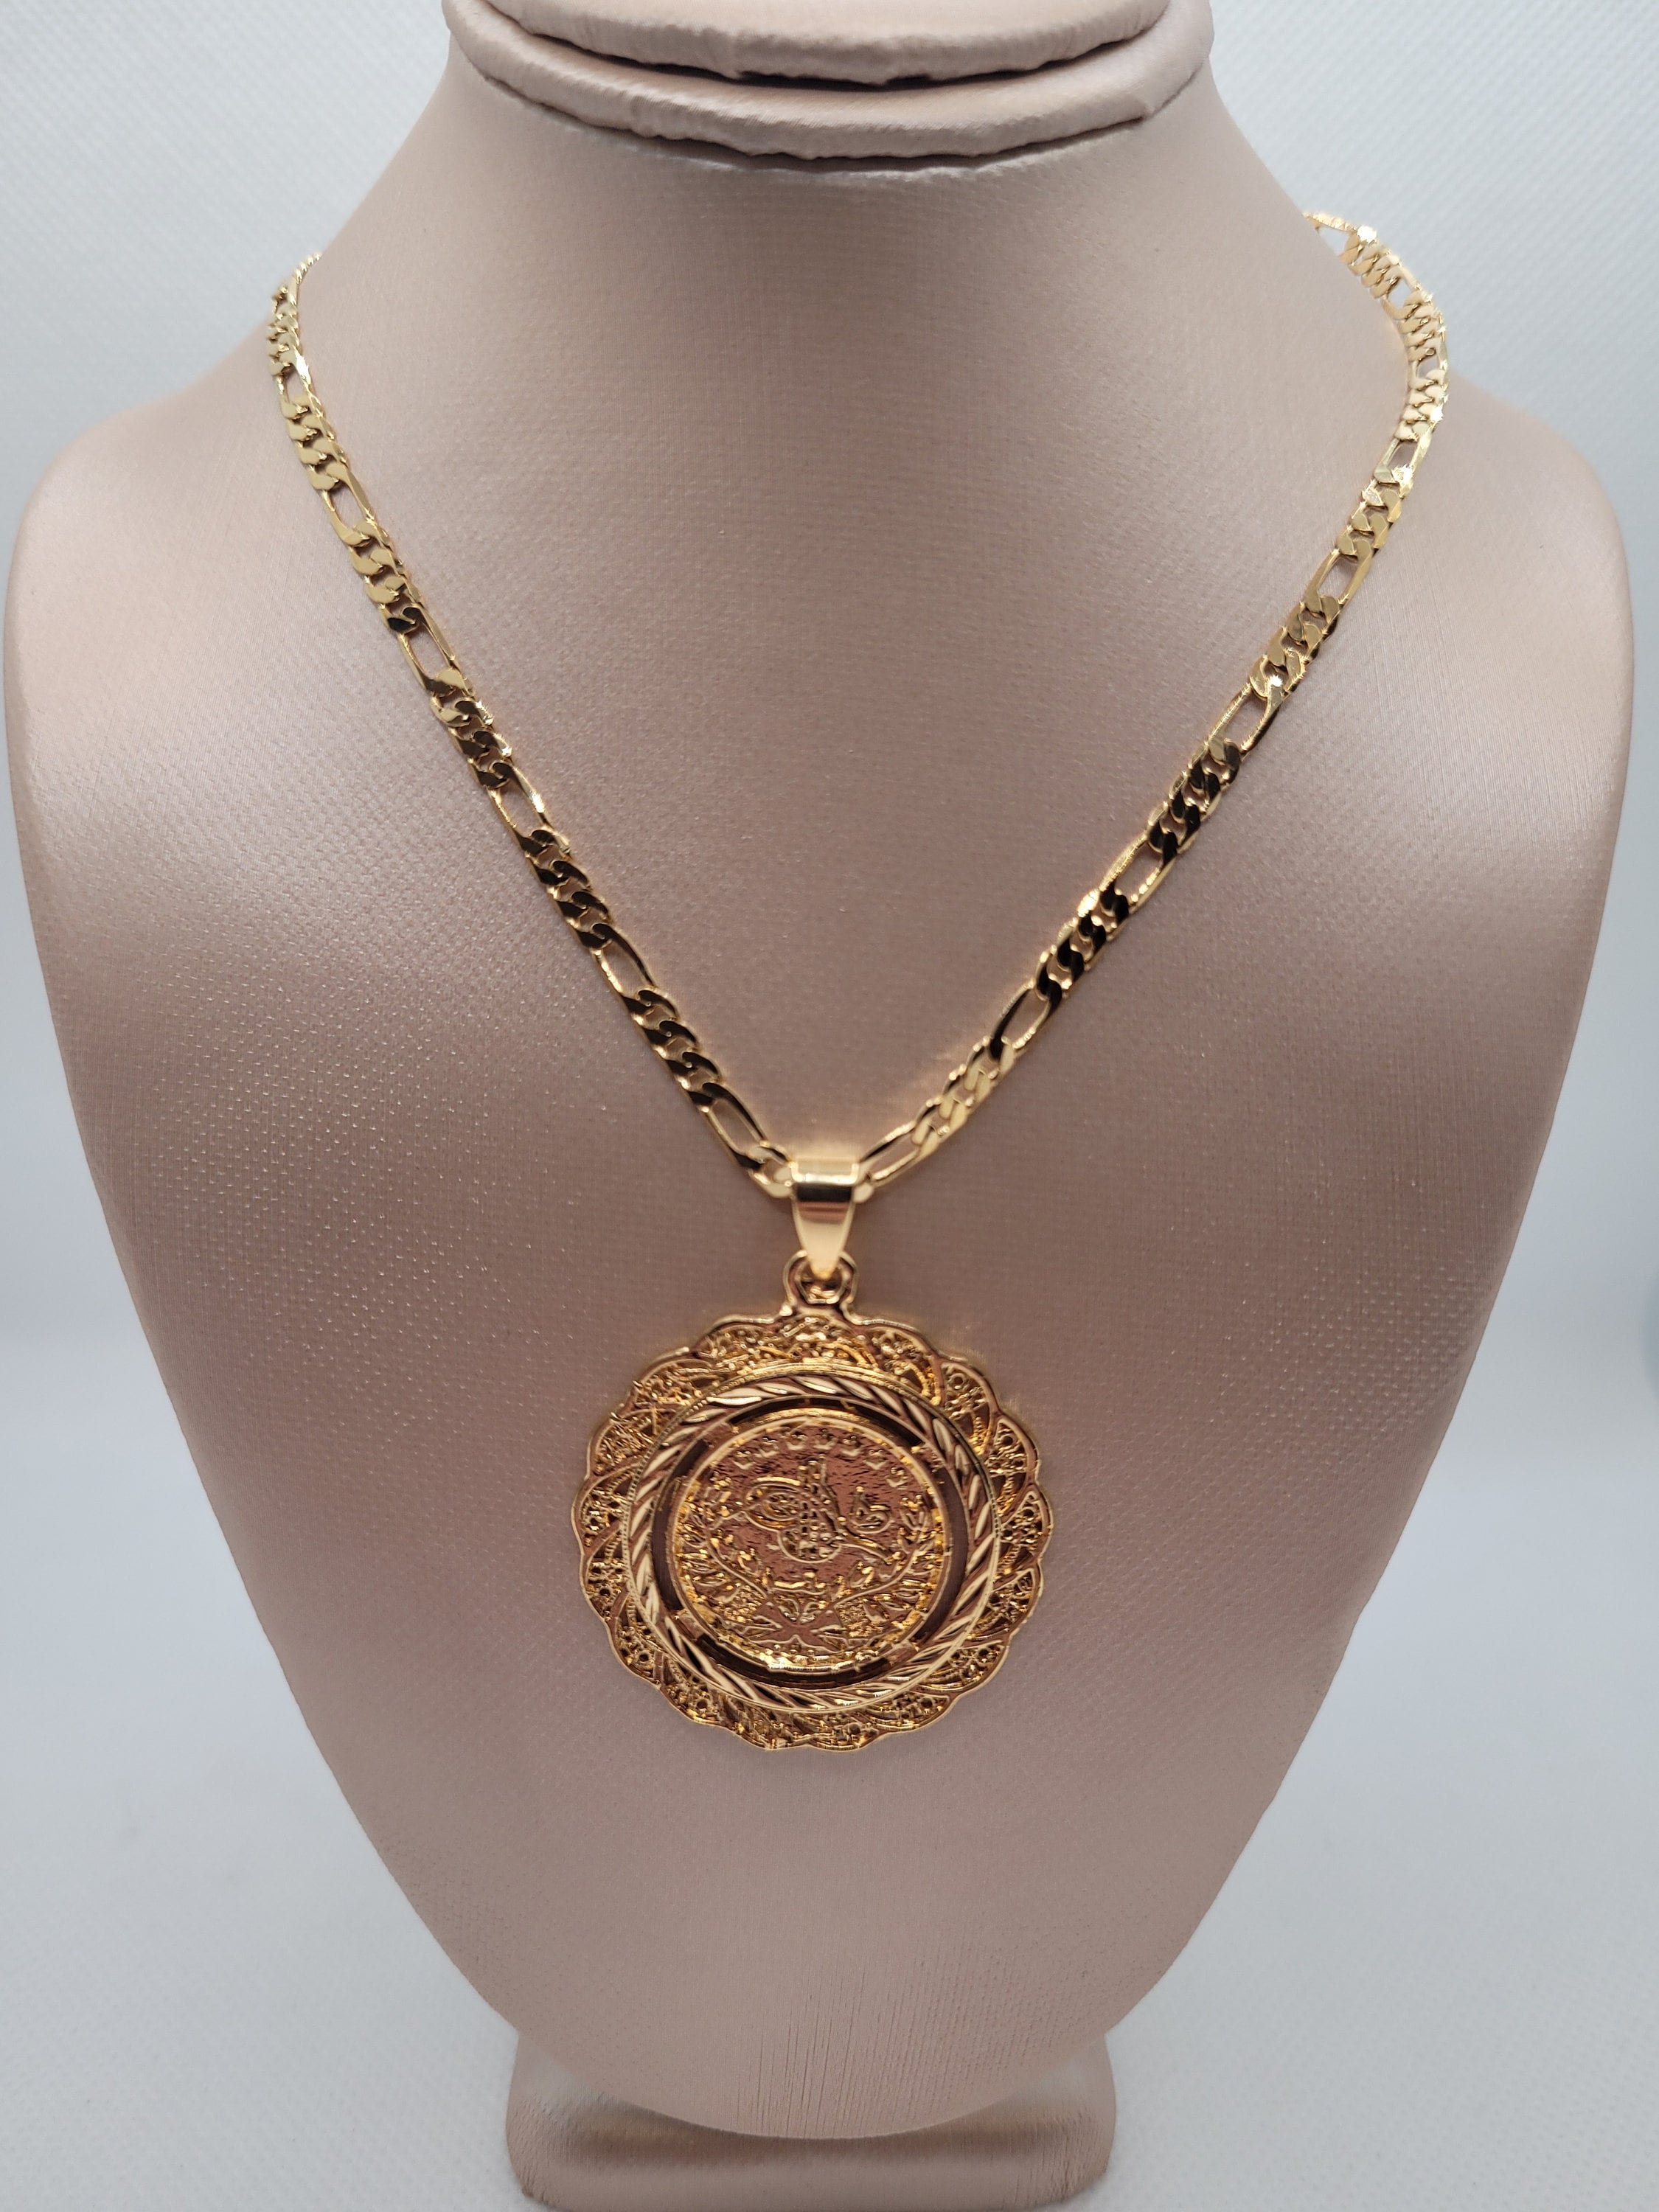 4.6cm Pendant Necklace Arab Coin for Women 18k Gold Plated Iced Out Turkey Coin  Jewelry Turk Coins | Wish